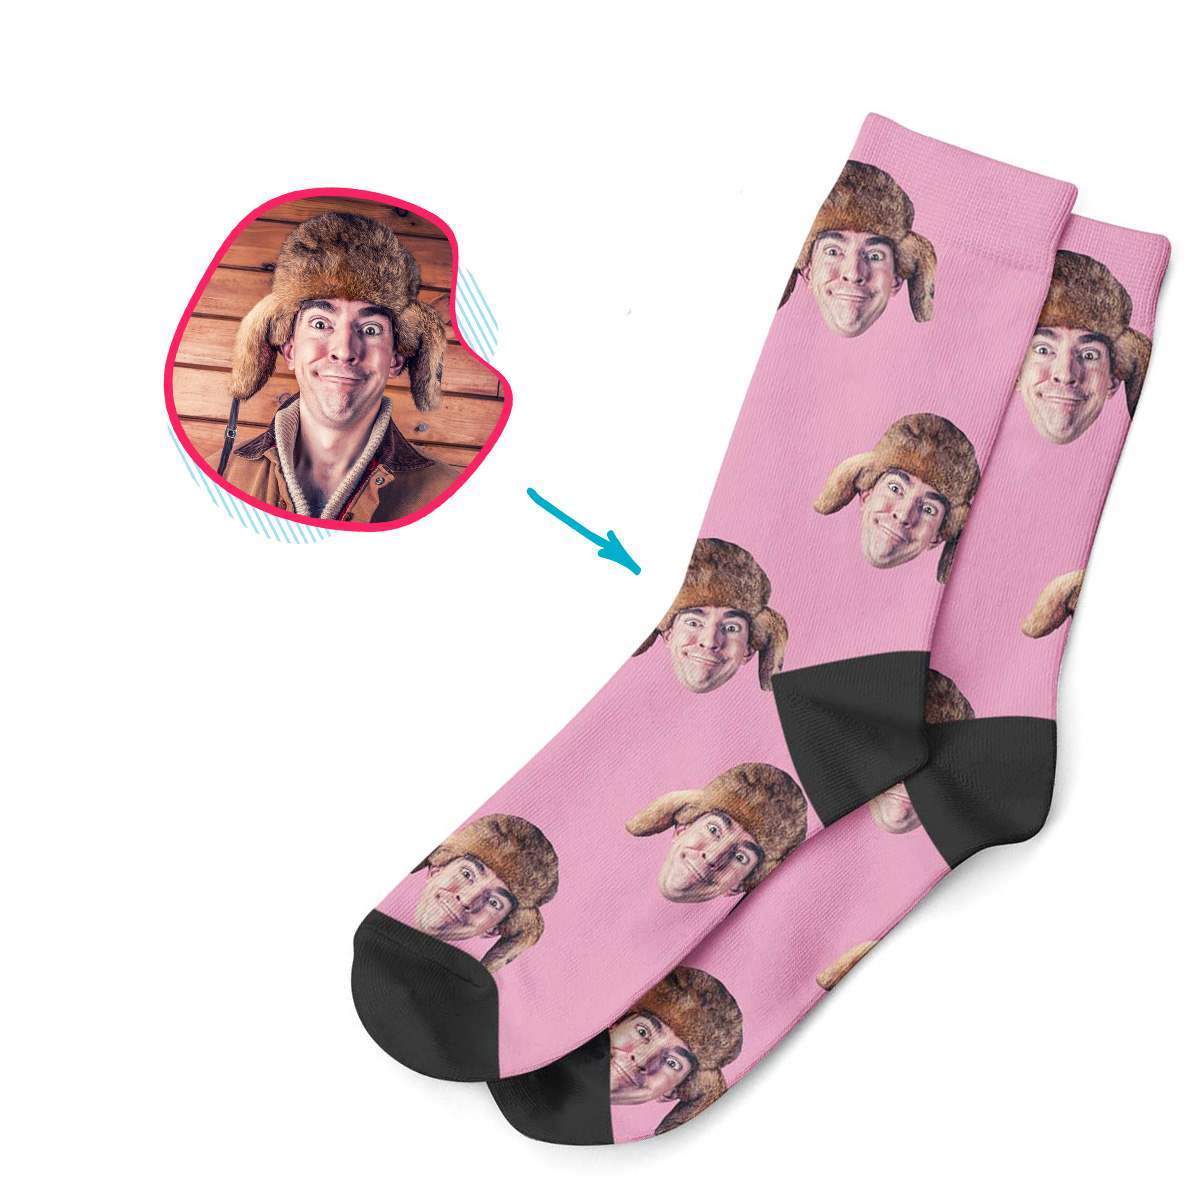 pink Blank design socks personalized with photo of face printed on them